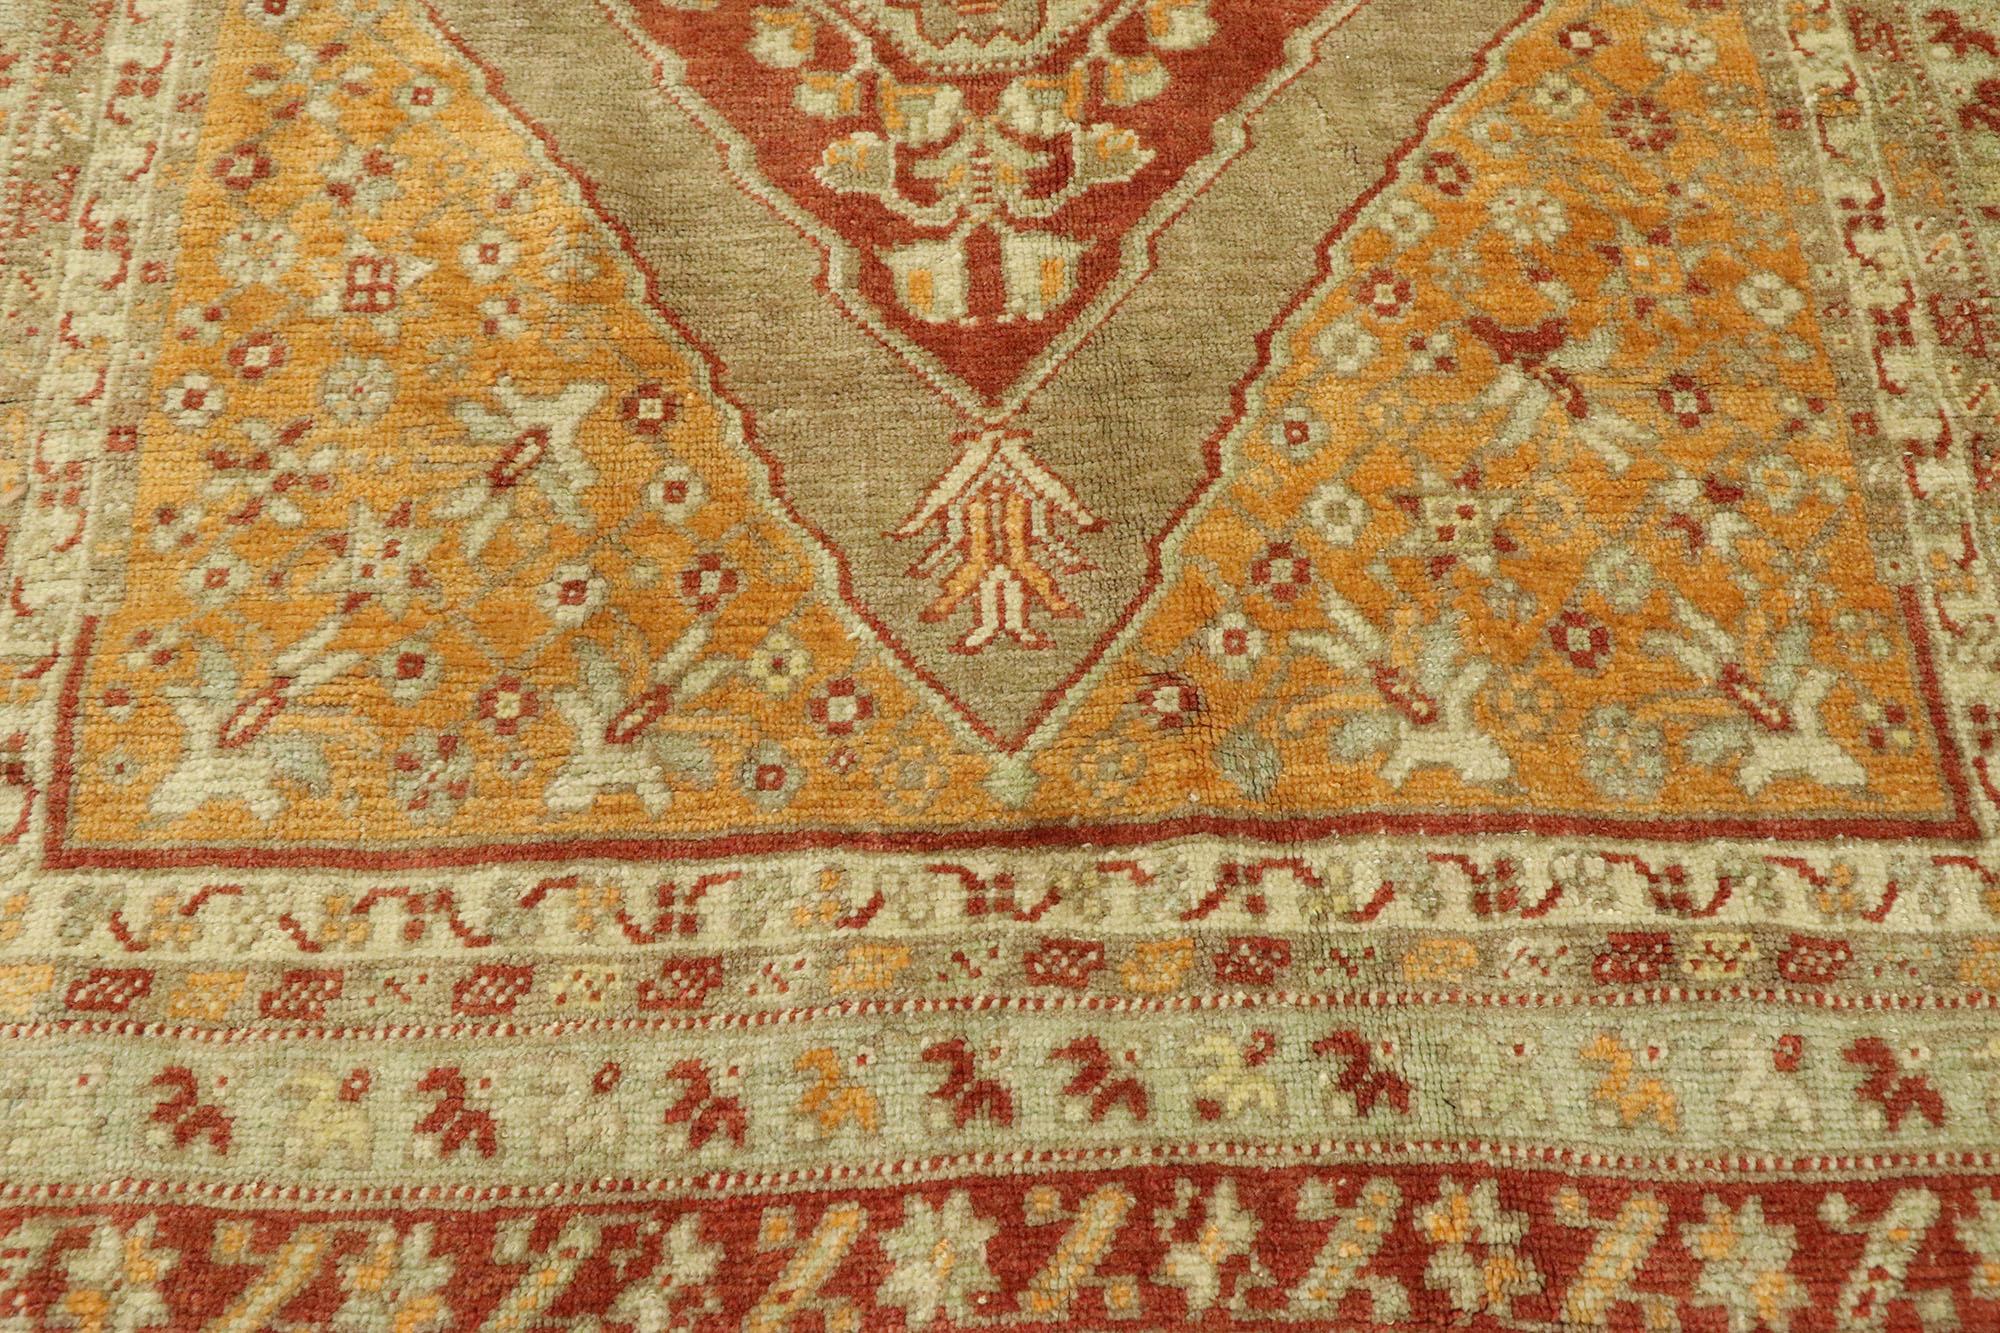 Vintage Turkish Oushak Runner with Warm Arts & Crafts Style In Good Condition For Sale In Dallas, TX